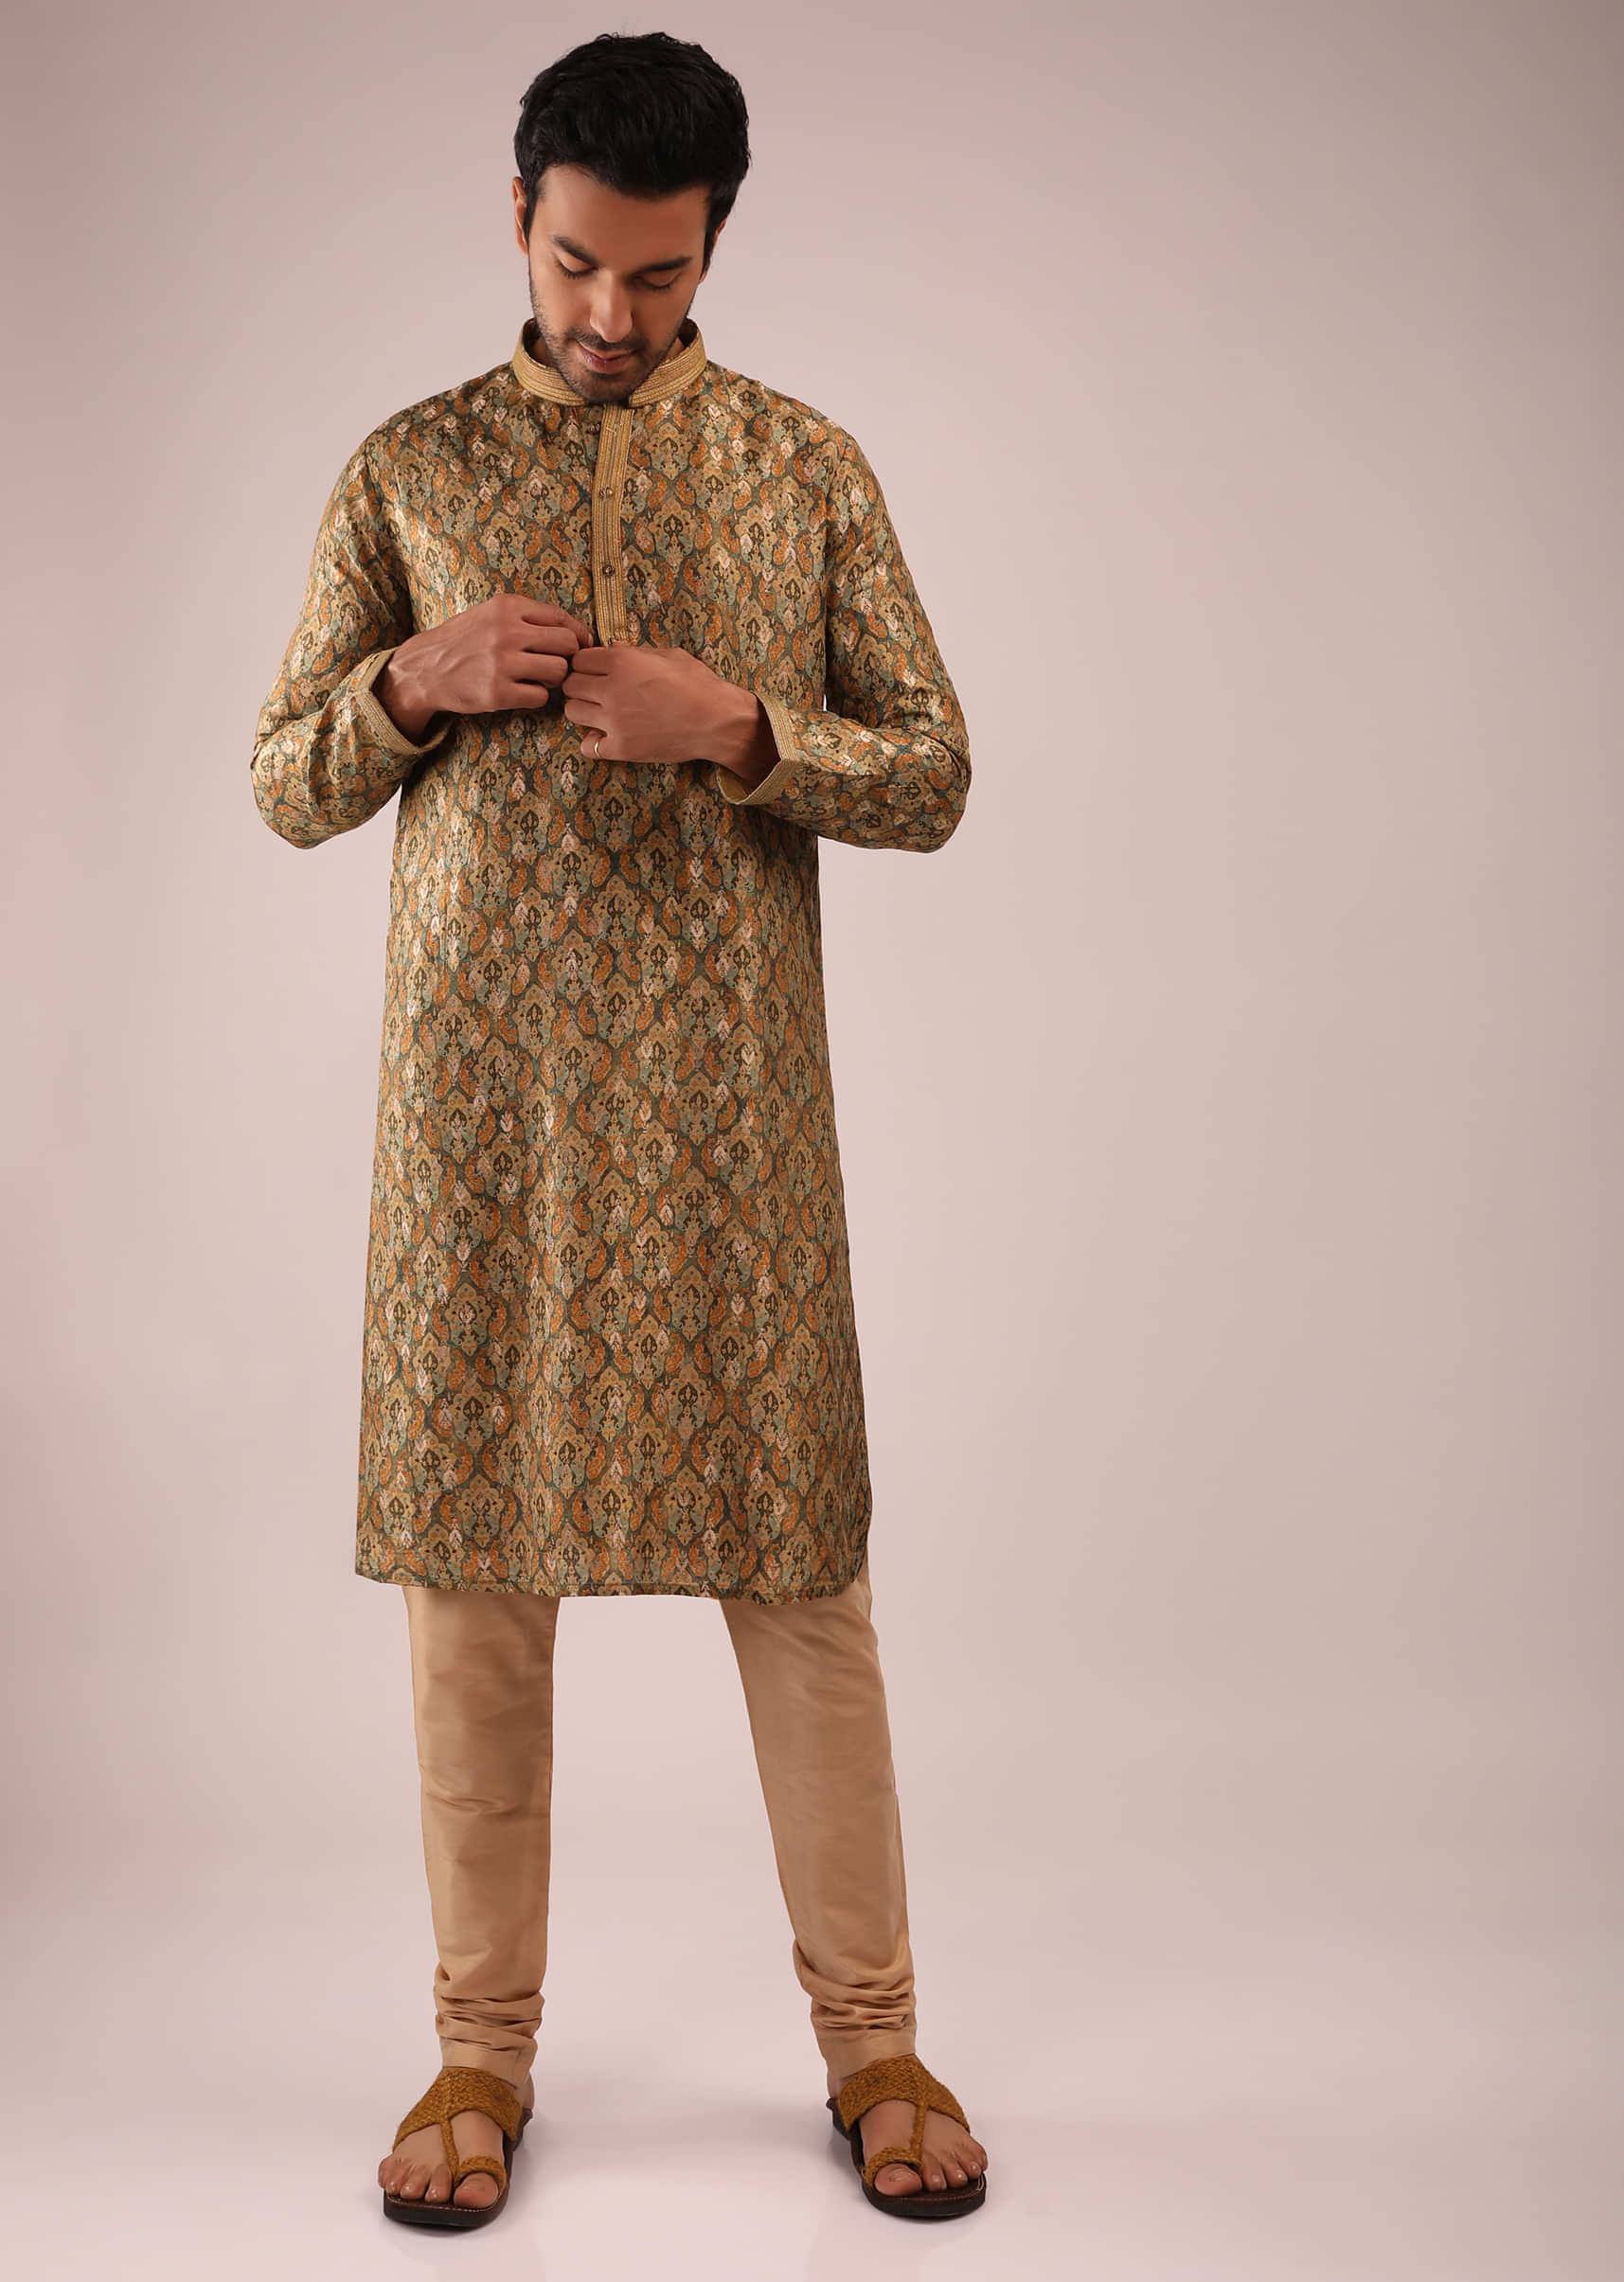 Gothic Olive Kurta Set In Brocade Silk With Earthy Colored Block Printed Moroccan Jaal